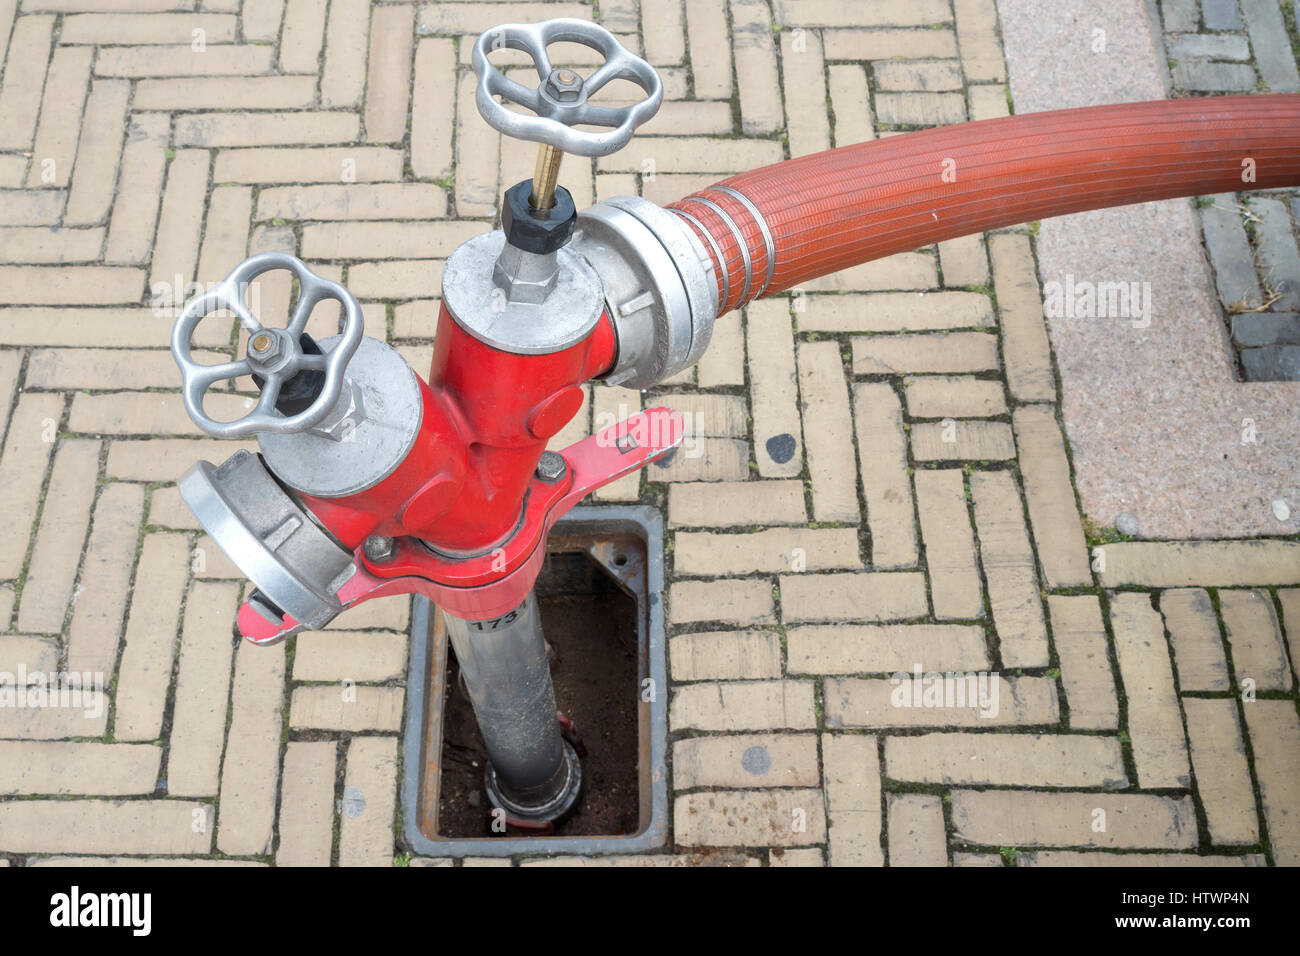 underground hydrant with Storz hose connections Stock Photo